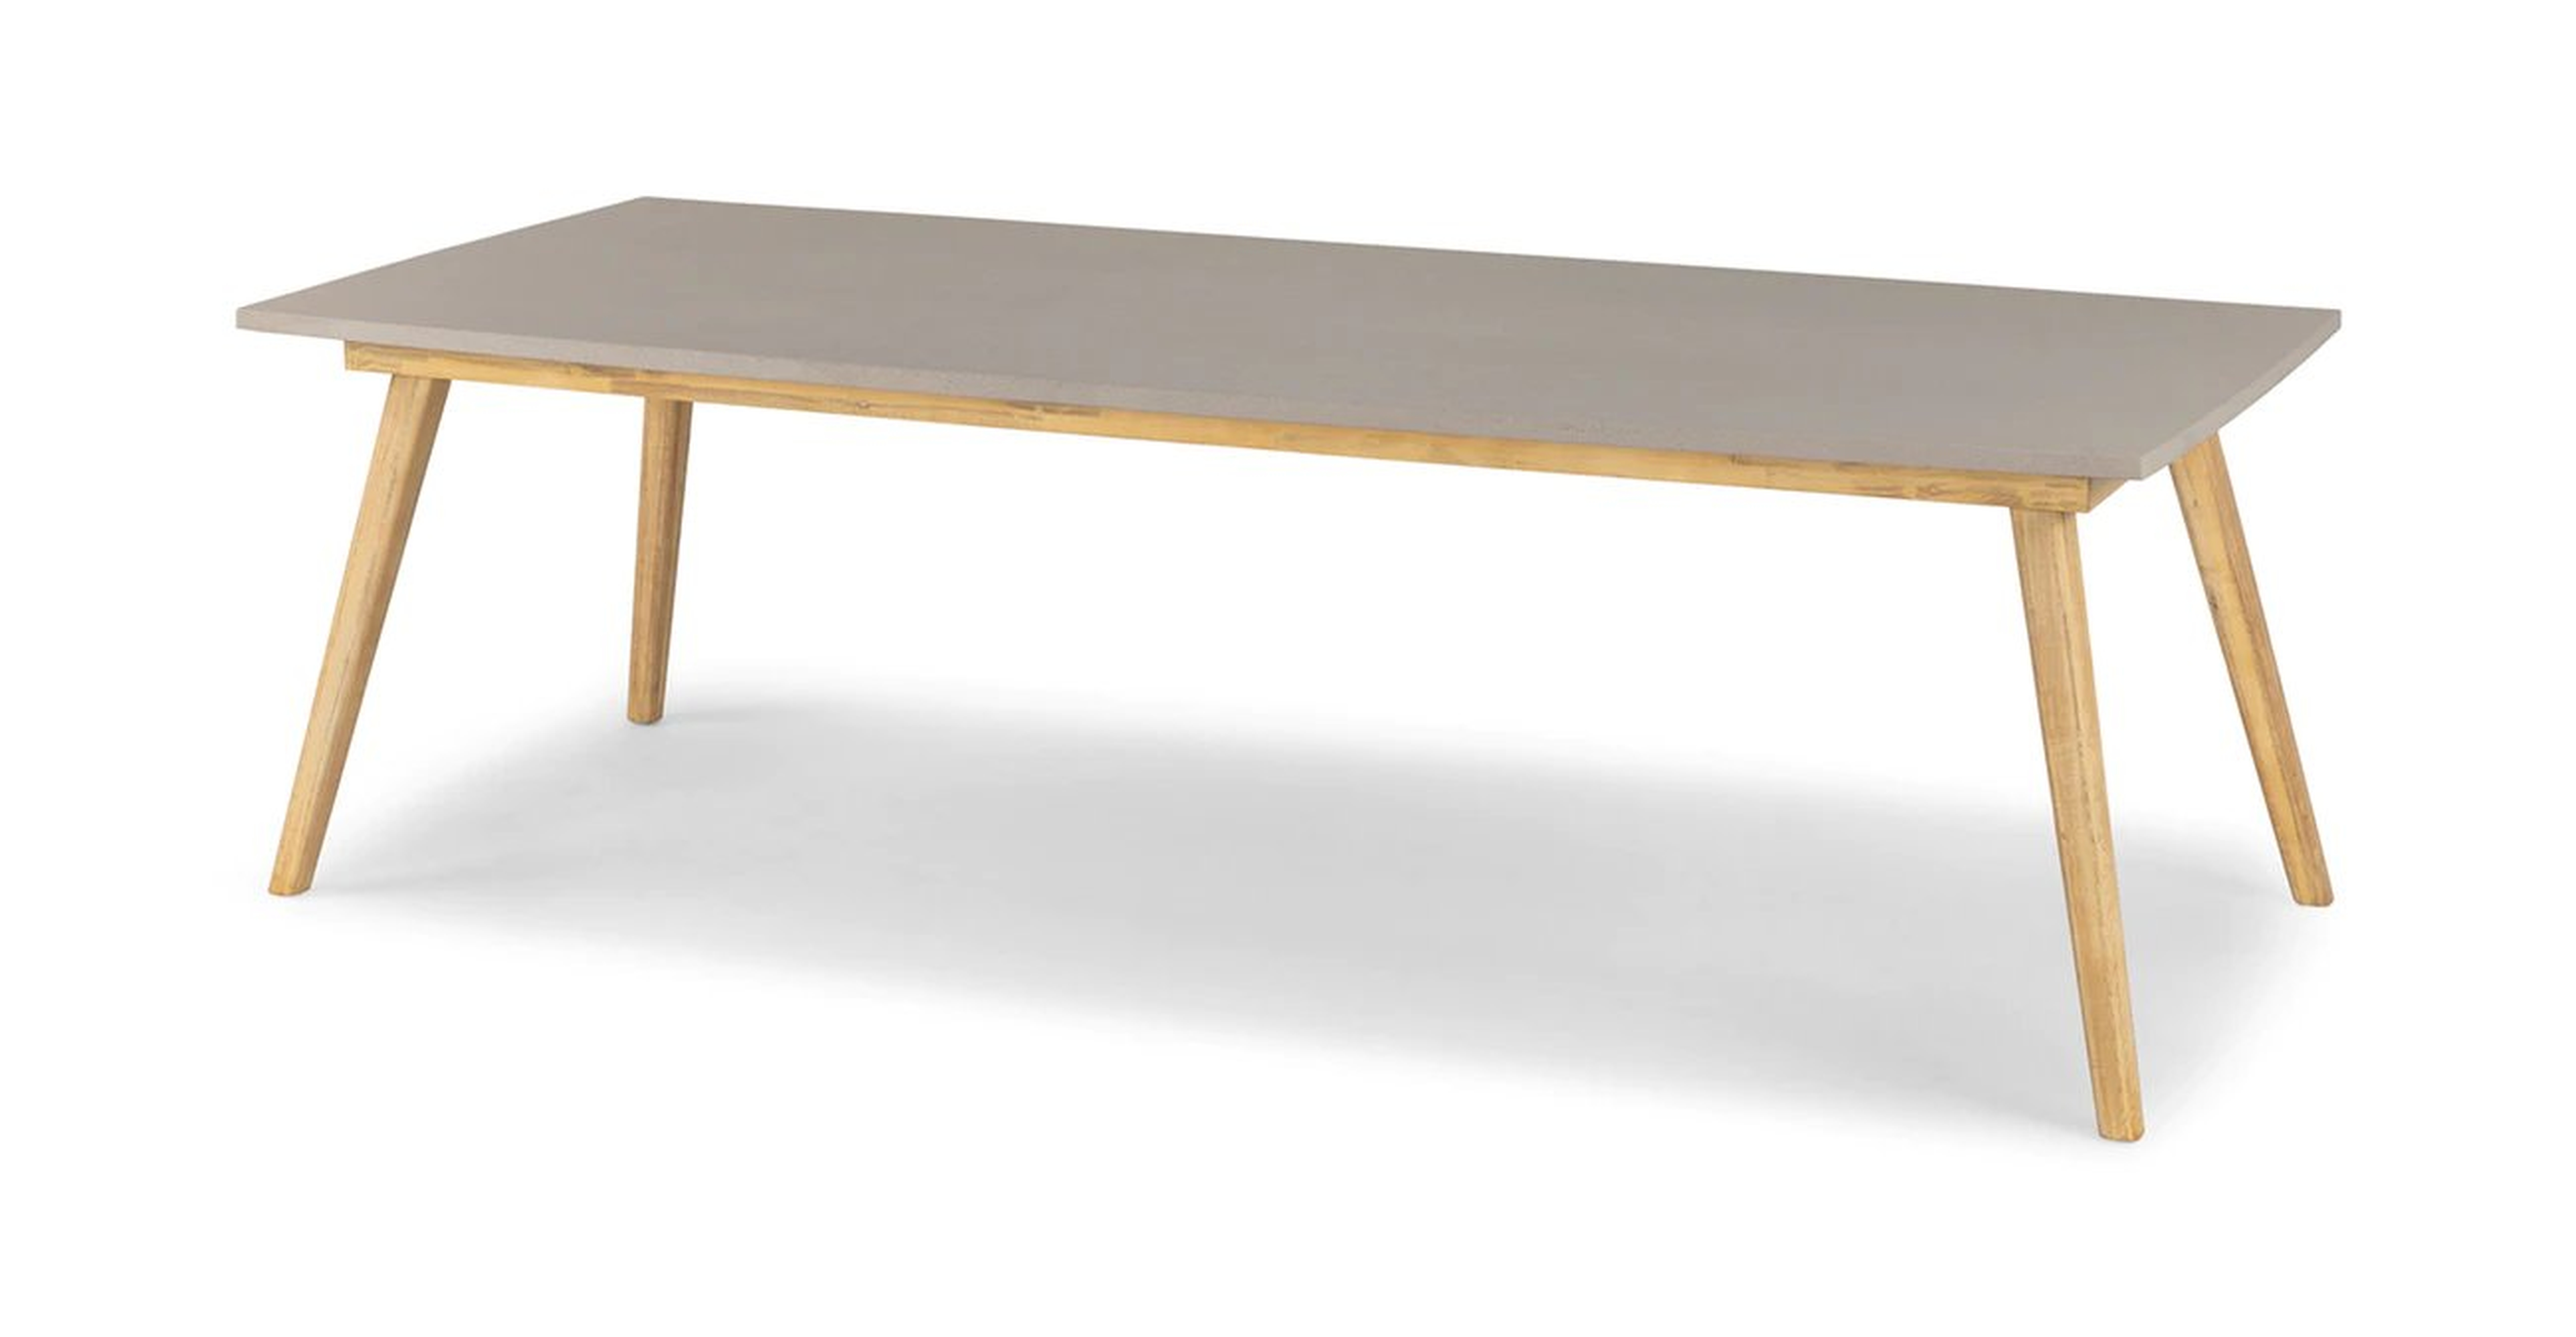 Atra Dining Table for 8 - Article